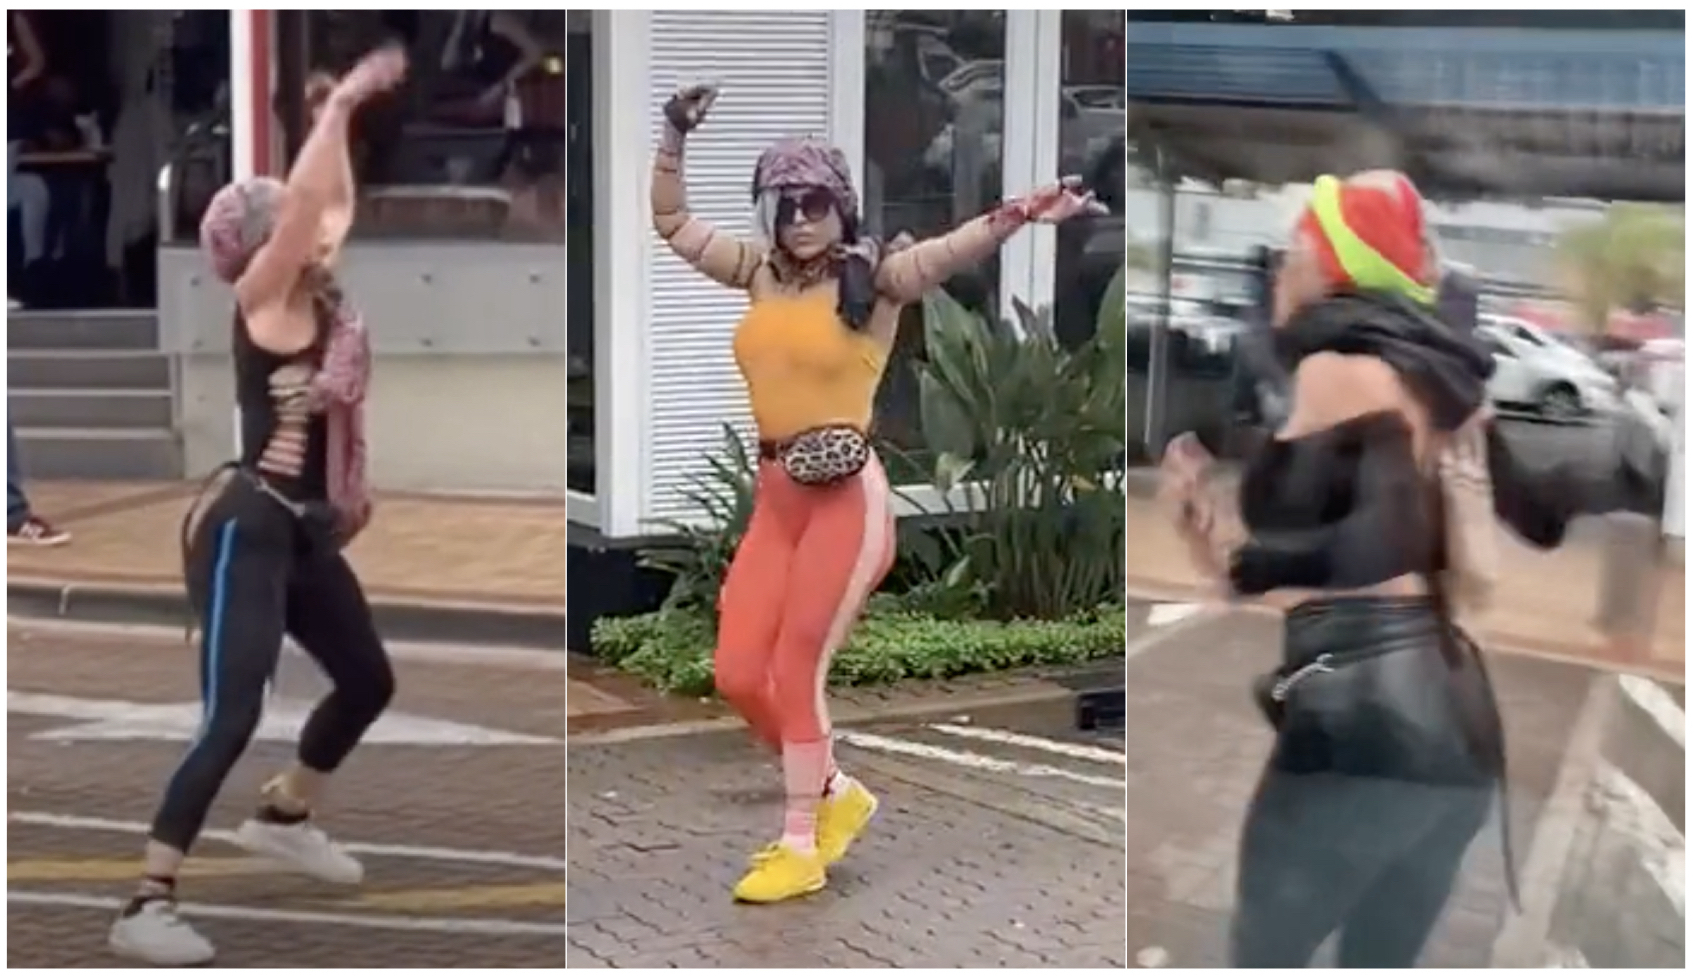 She's become known as the Dancing "Mad Woman" Jogger and her videos are a little crazy but she's making us all smile!